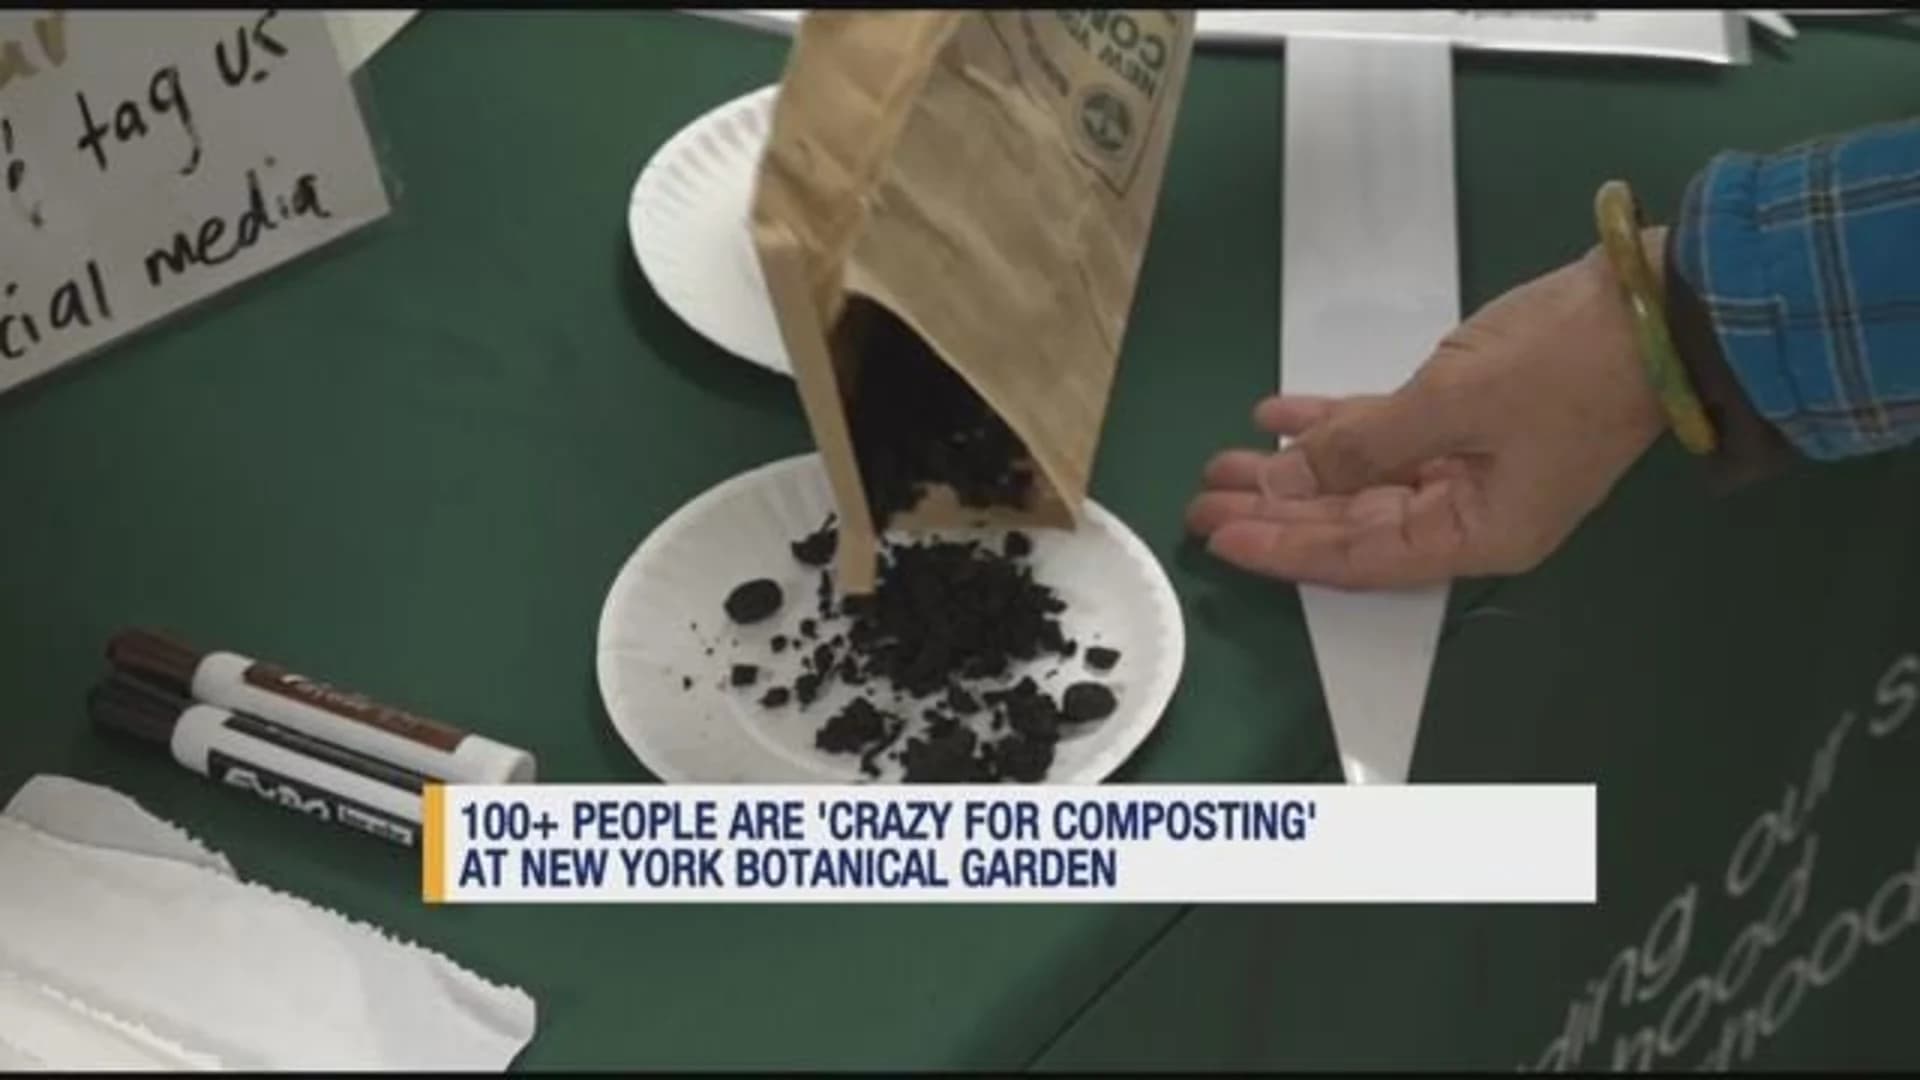 Over 100 people gather for Crazy for Composting event at NY Botanical Garden